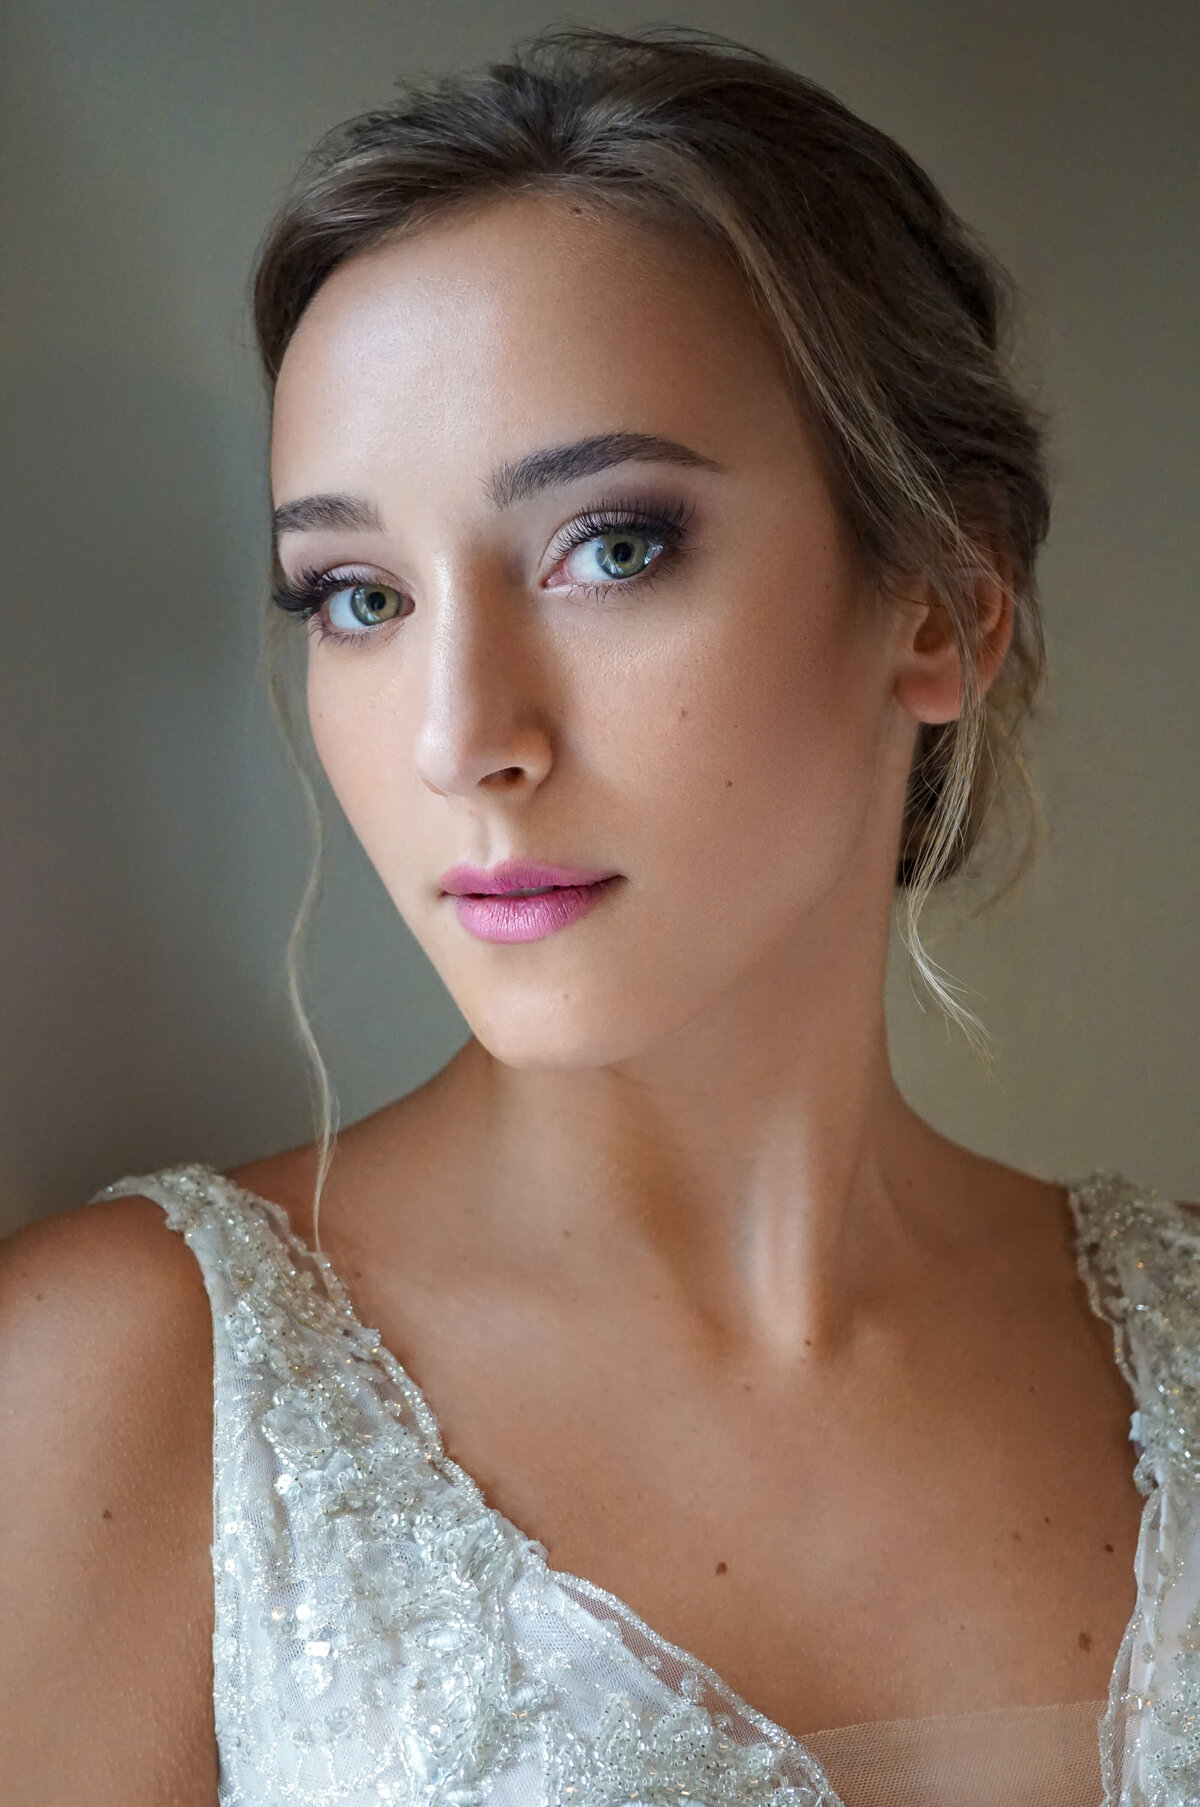 A brunette looks into the camera while wearing pink lips and a soft glam eye makeup.